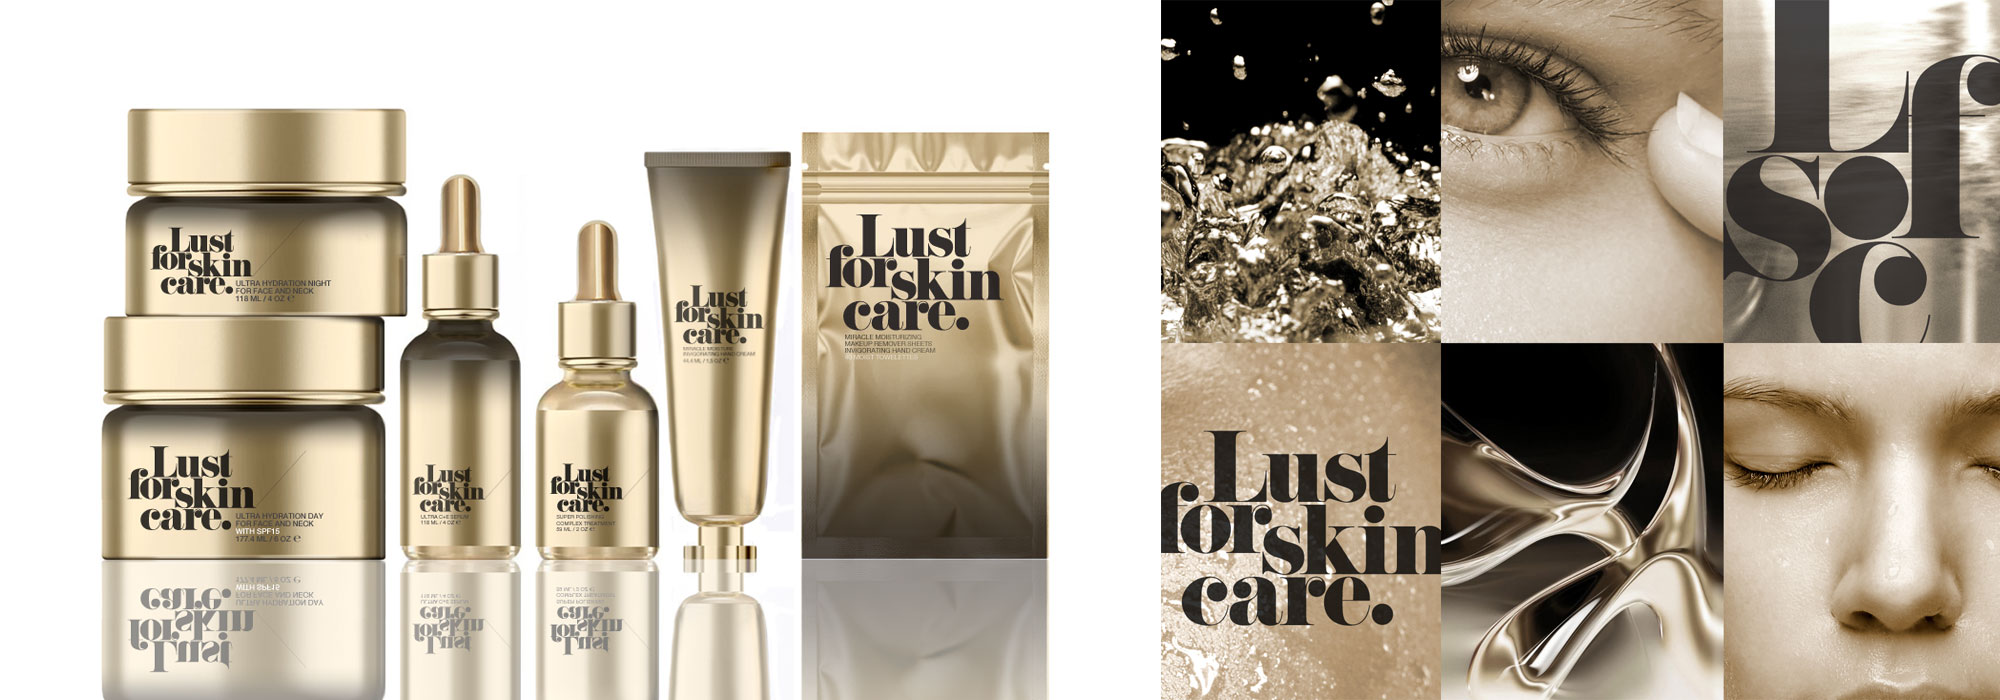 Lust for Skincare branding and packaging designed by MPAKT